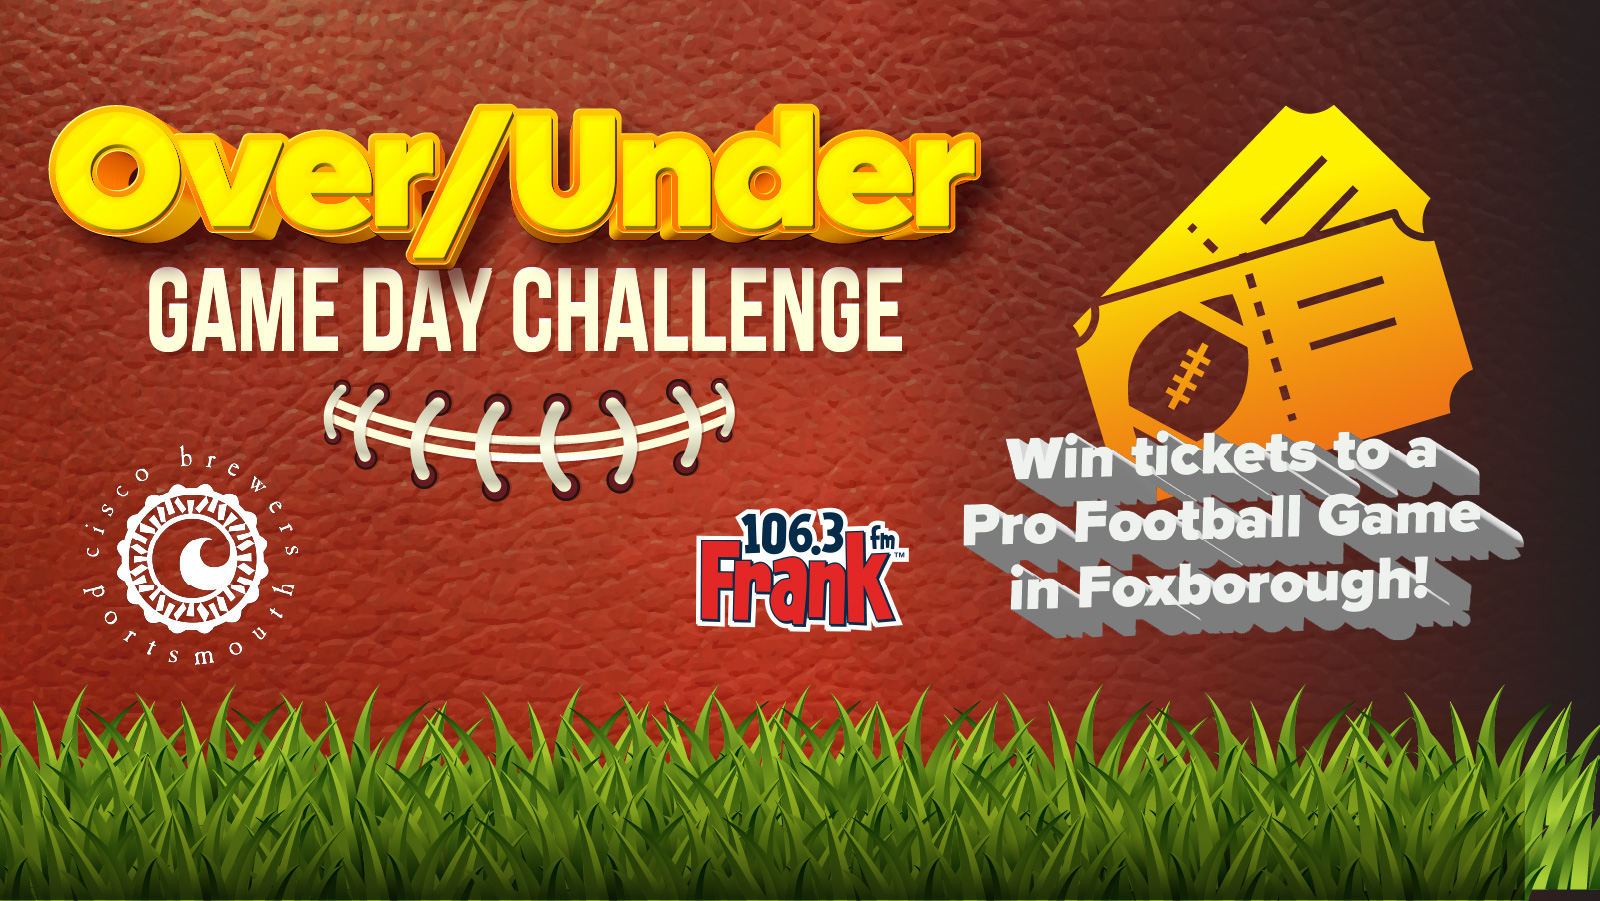 Cisco Brewery’s Over/Under Game Day Challenge – Win Tickets to An Upcoming Football Game!